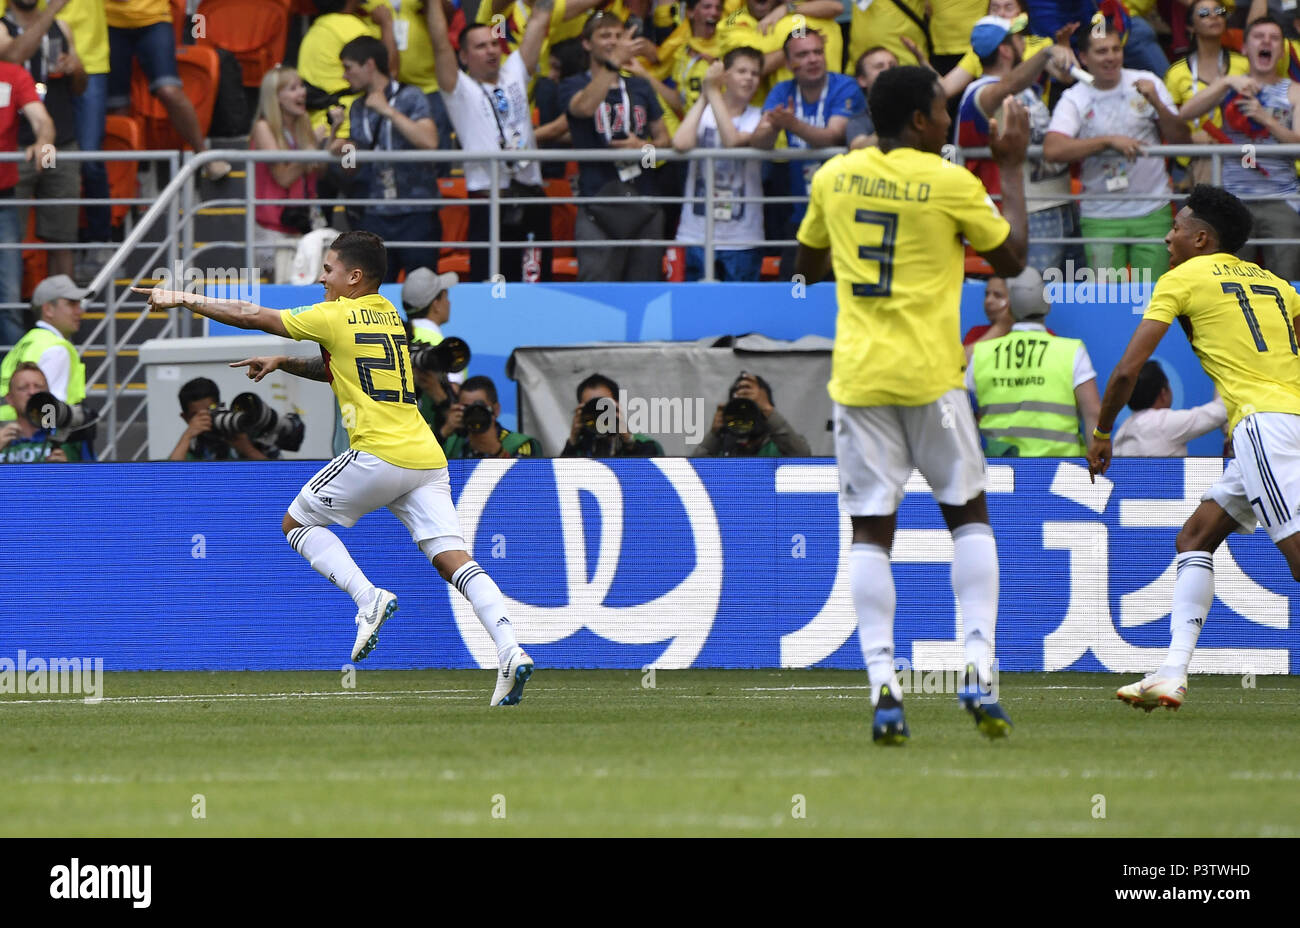 Saransk, Russia. 19th June, 2018. Juan Quintero (L) of Colombia celebrates his scoring during a Group H match between Colombia and Japan at the 2018 FIFA World Cup in Saransk, Russia, June 19, 2018. Credit: He Canling/Xinhua/Alamy Live News Stock Photo